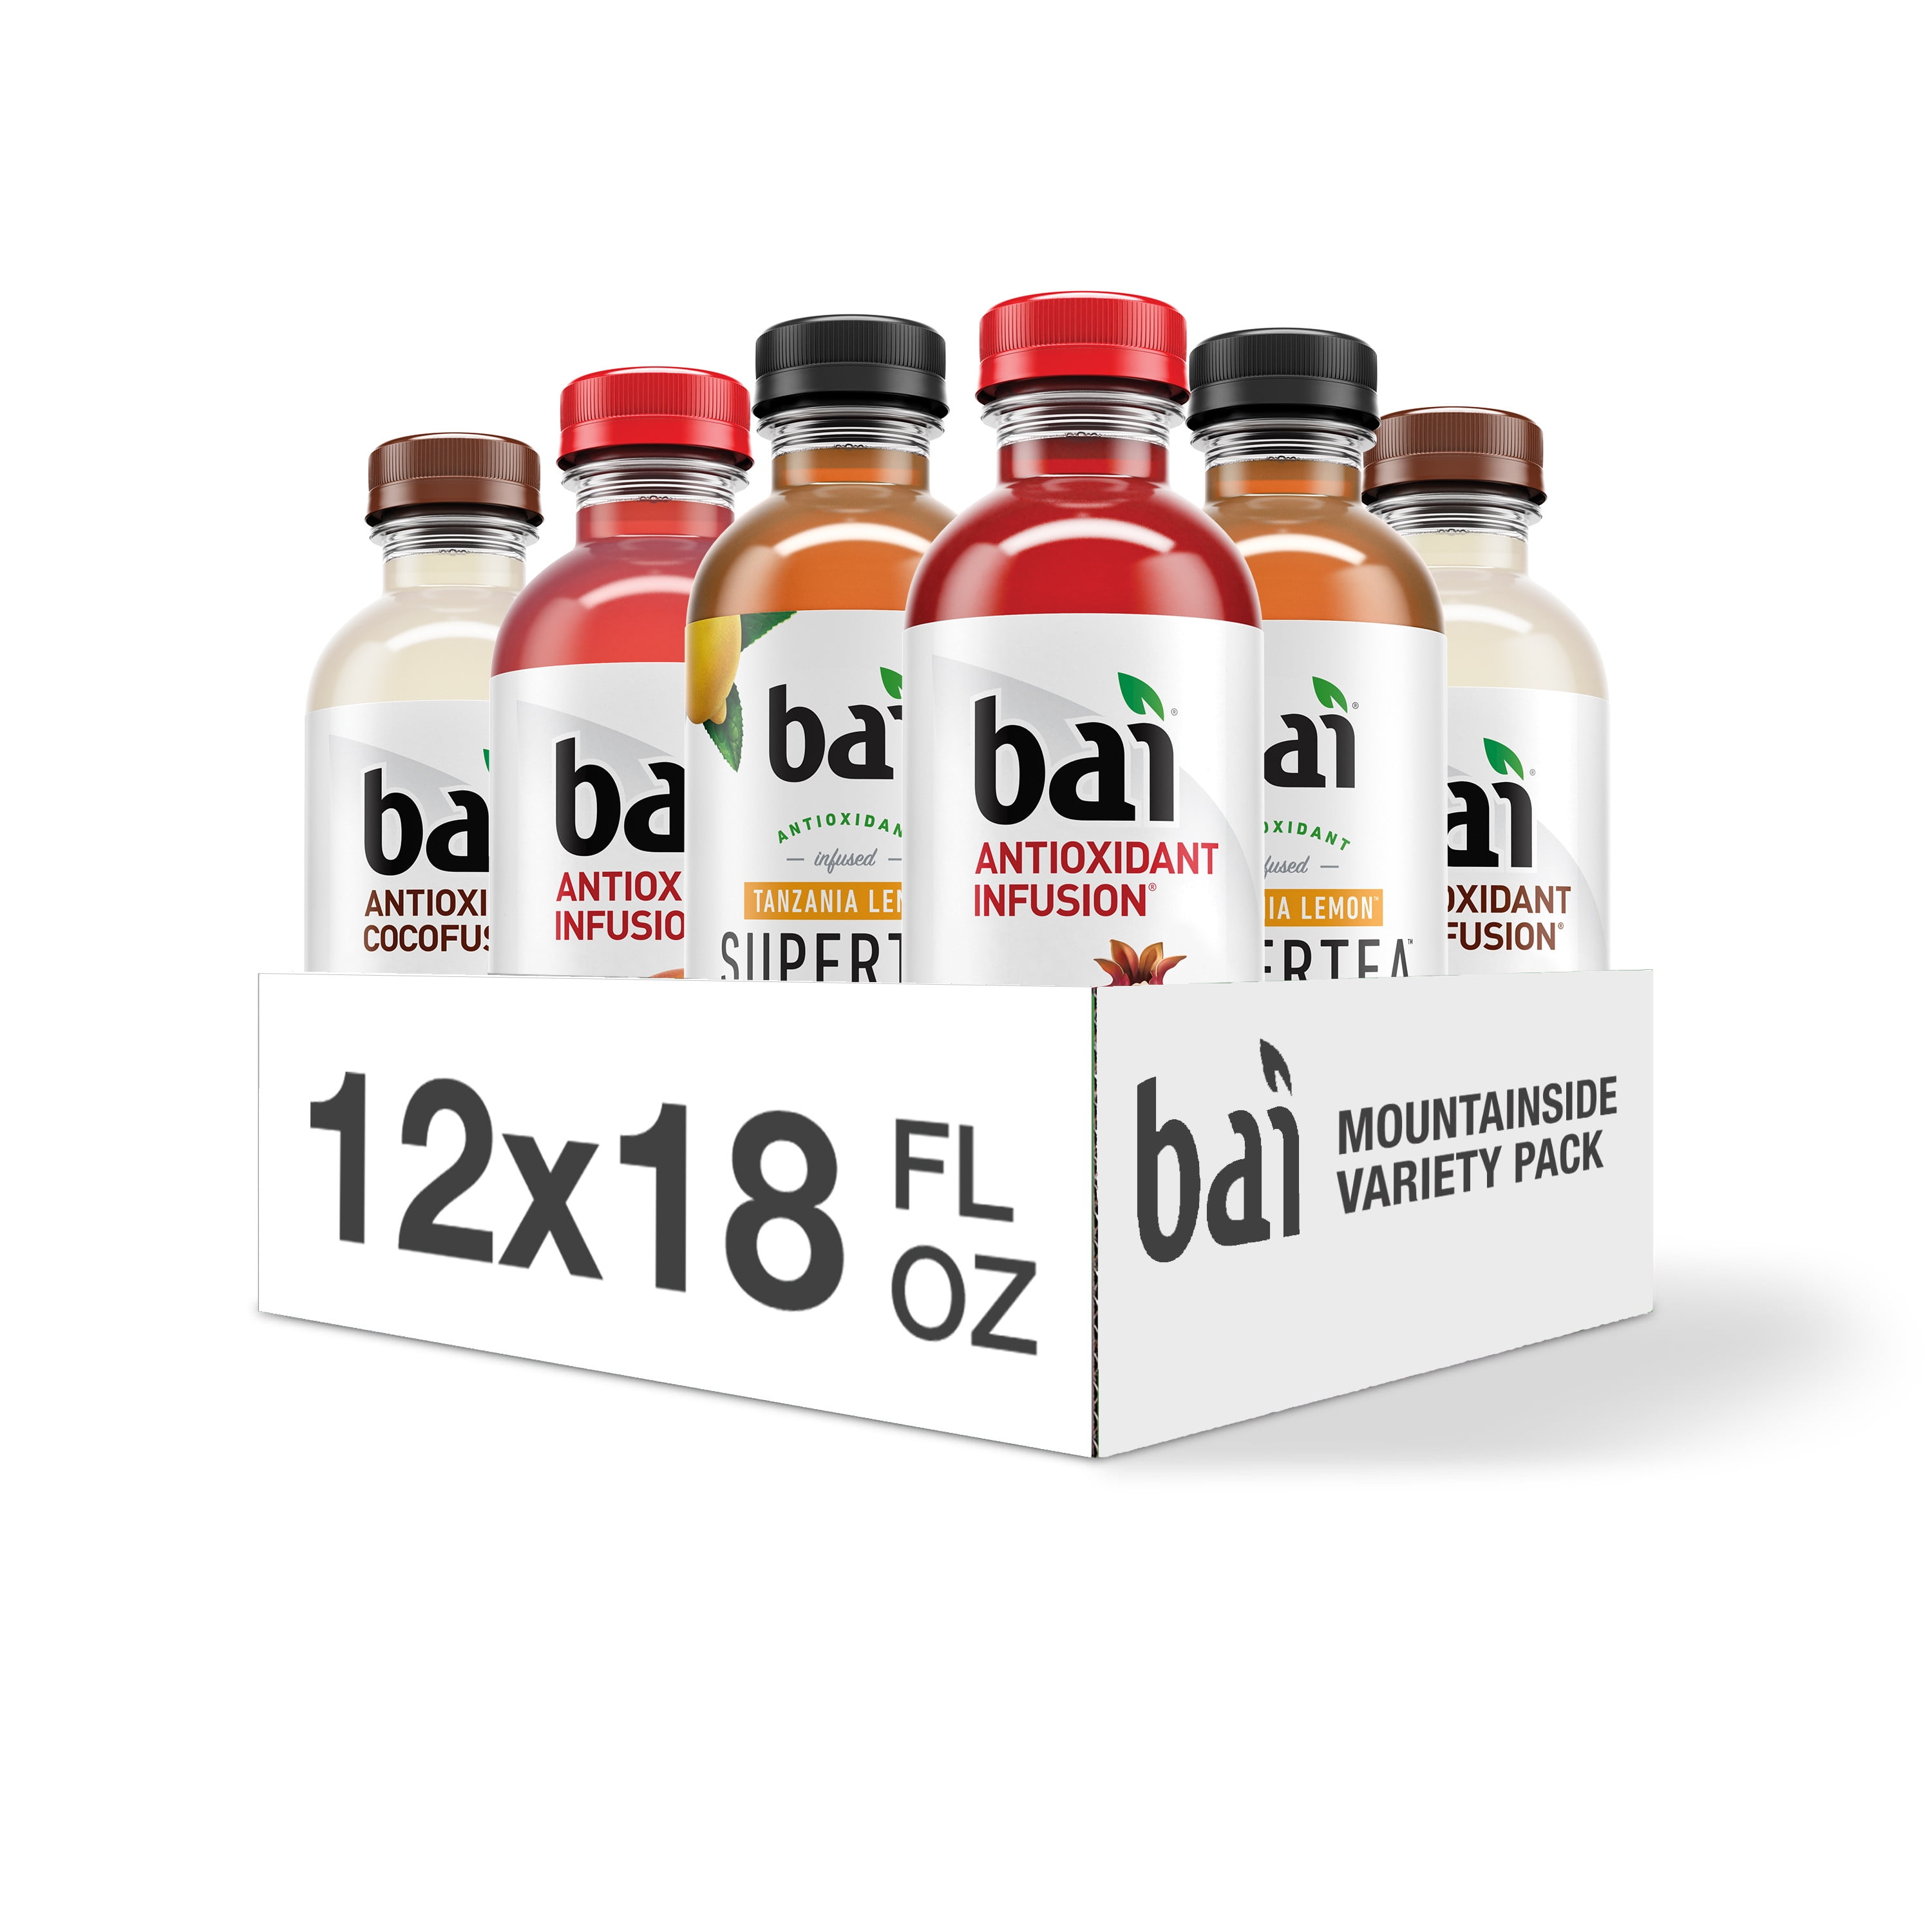 Is Bai Drink Good For You? - Assessing the Healthiness of Bai's